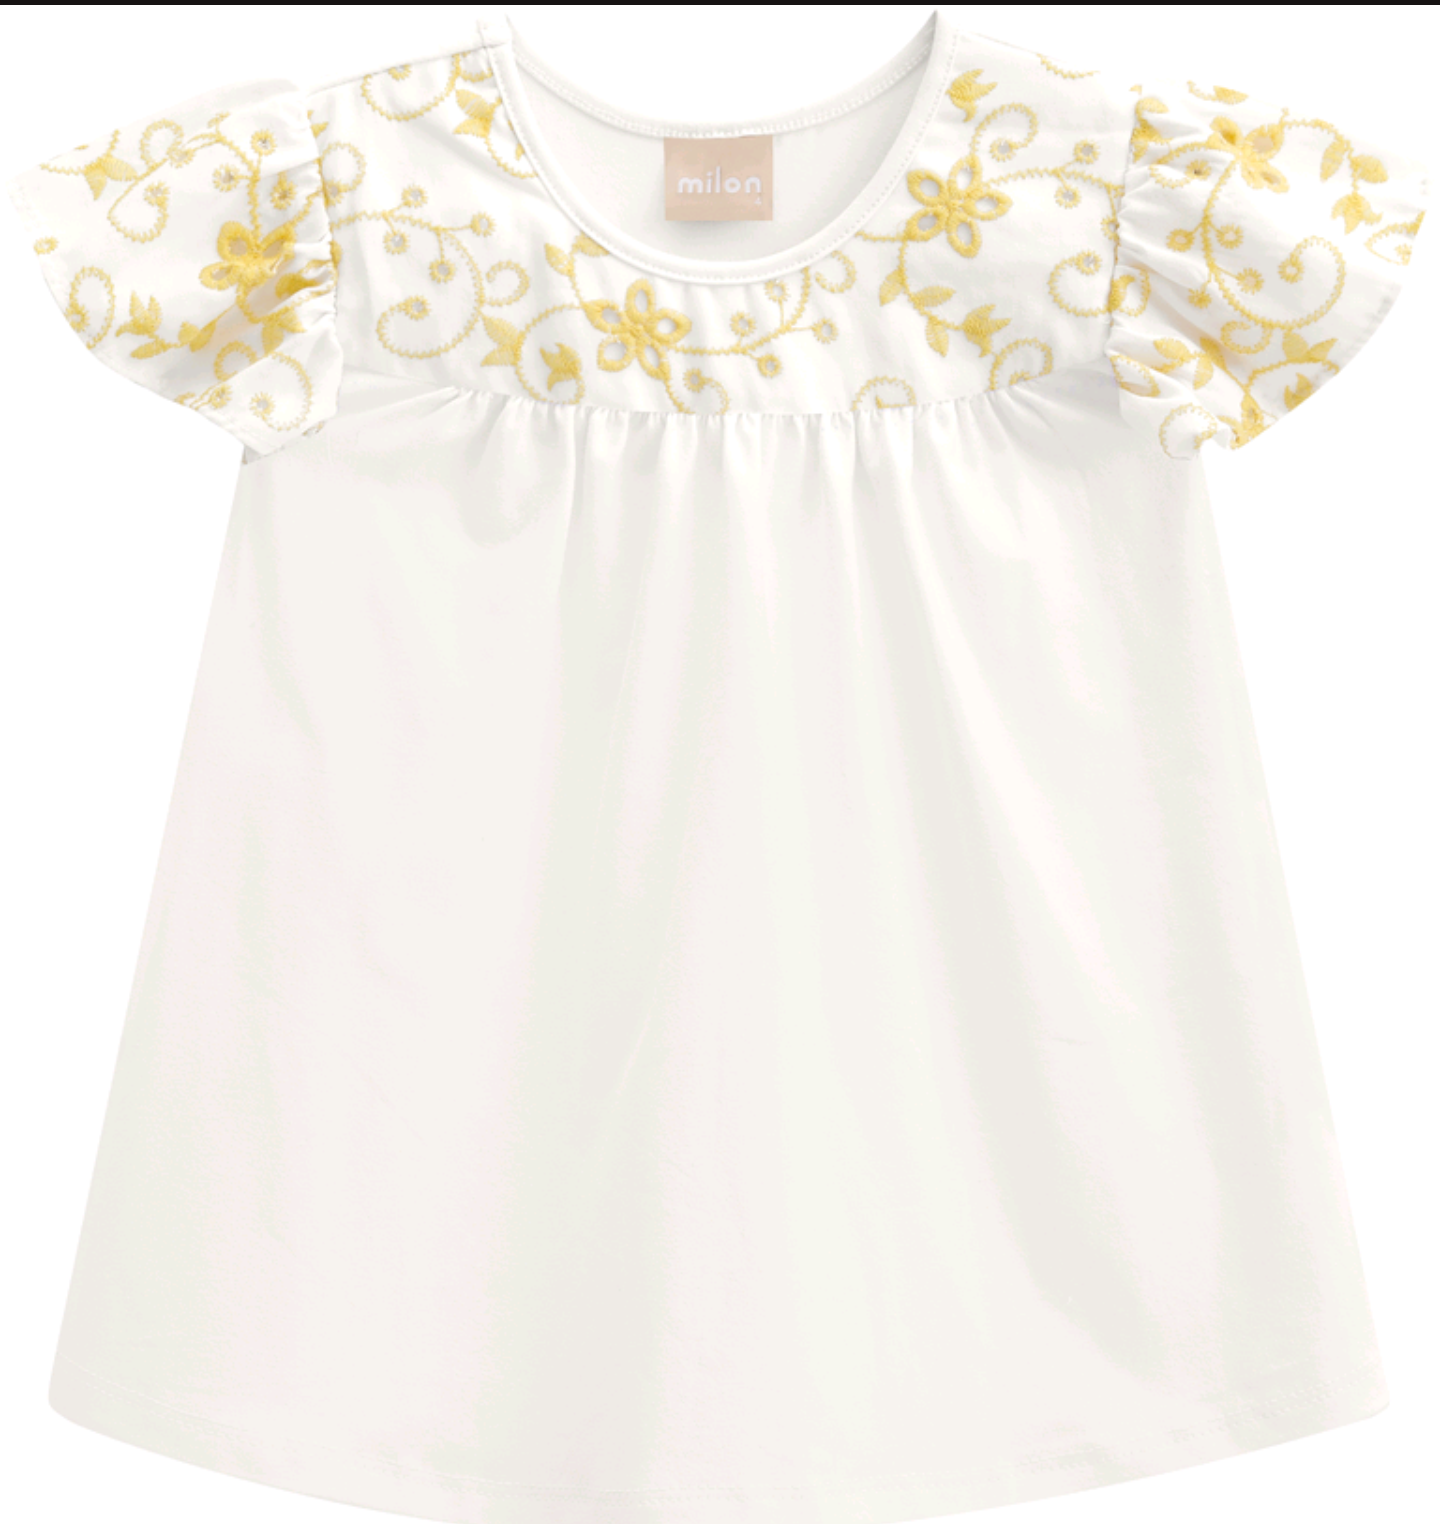 Milon Clothing Junior Girl S/S Embroidery Top